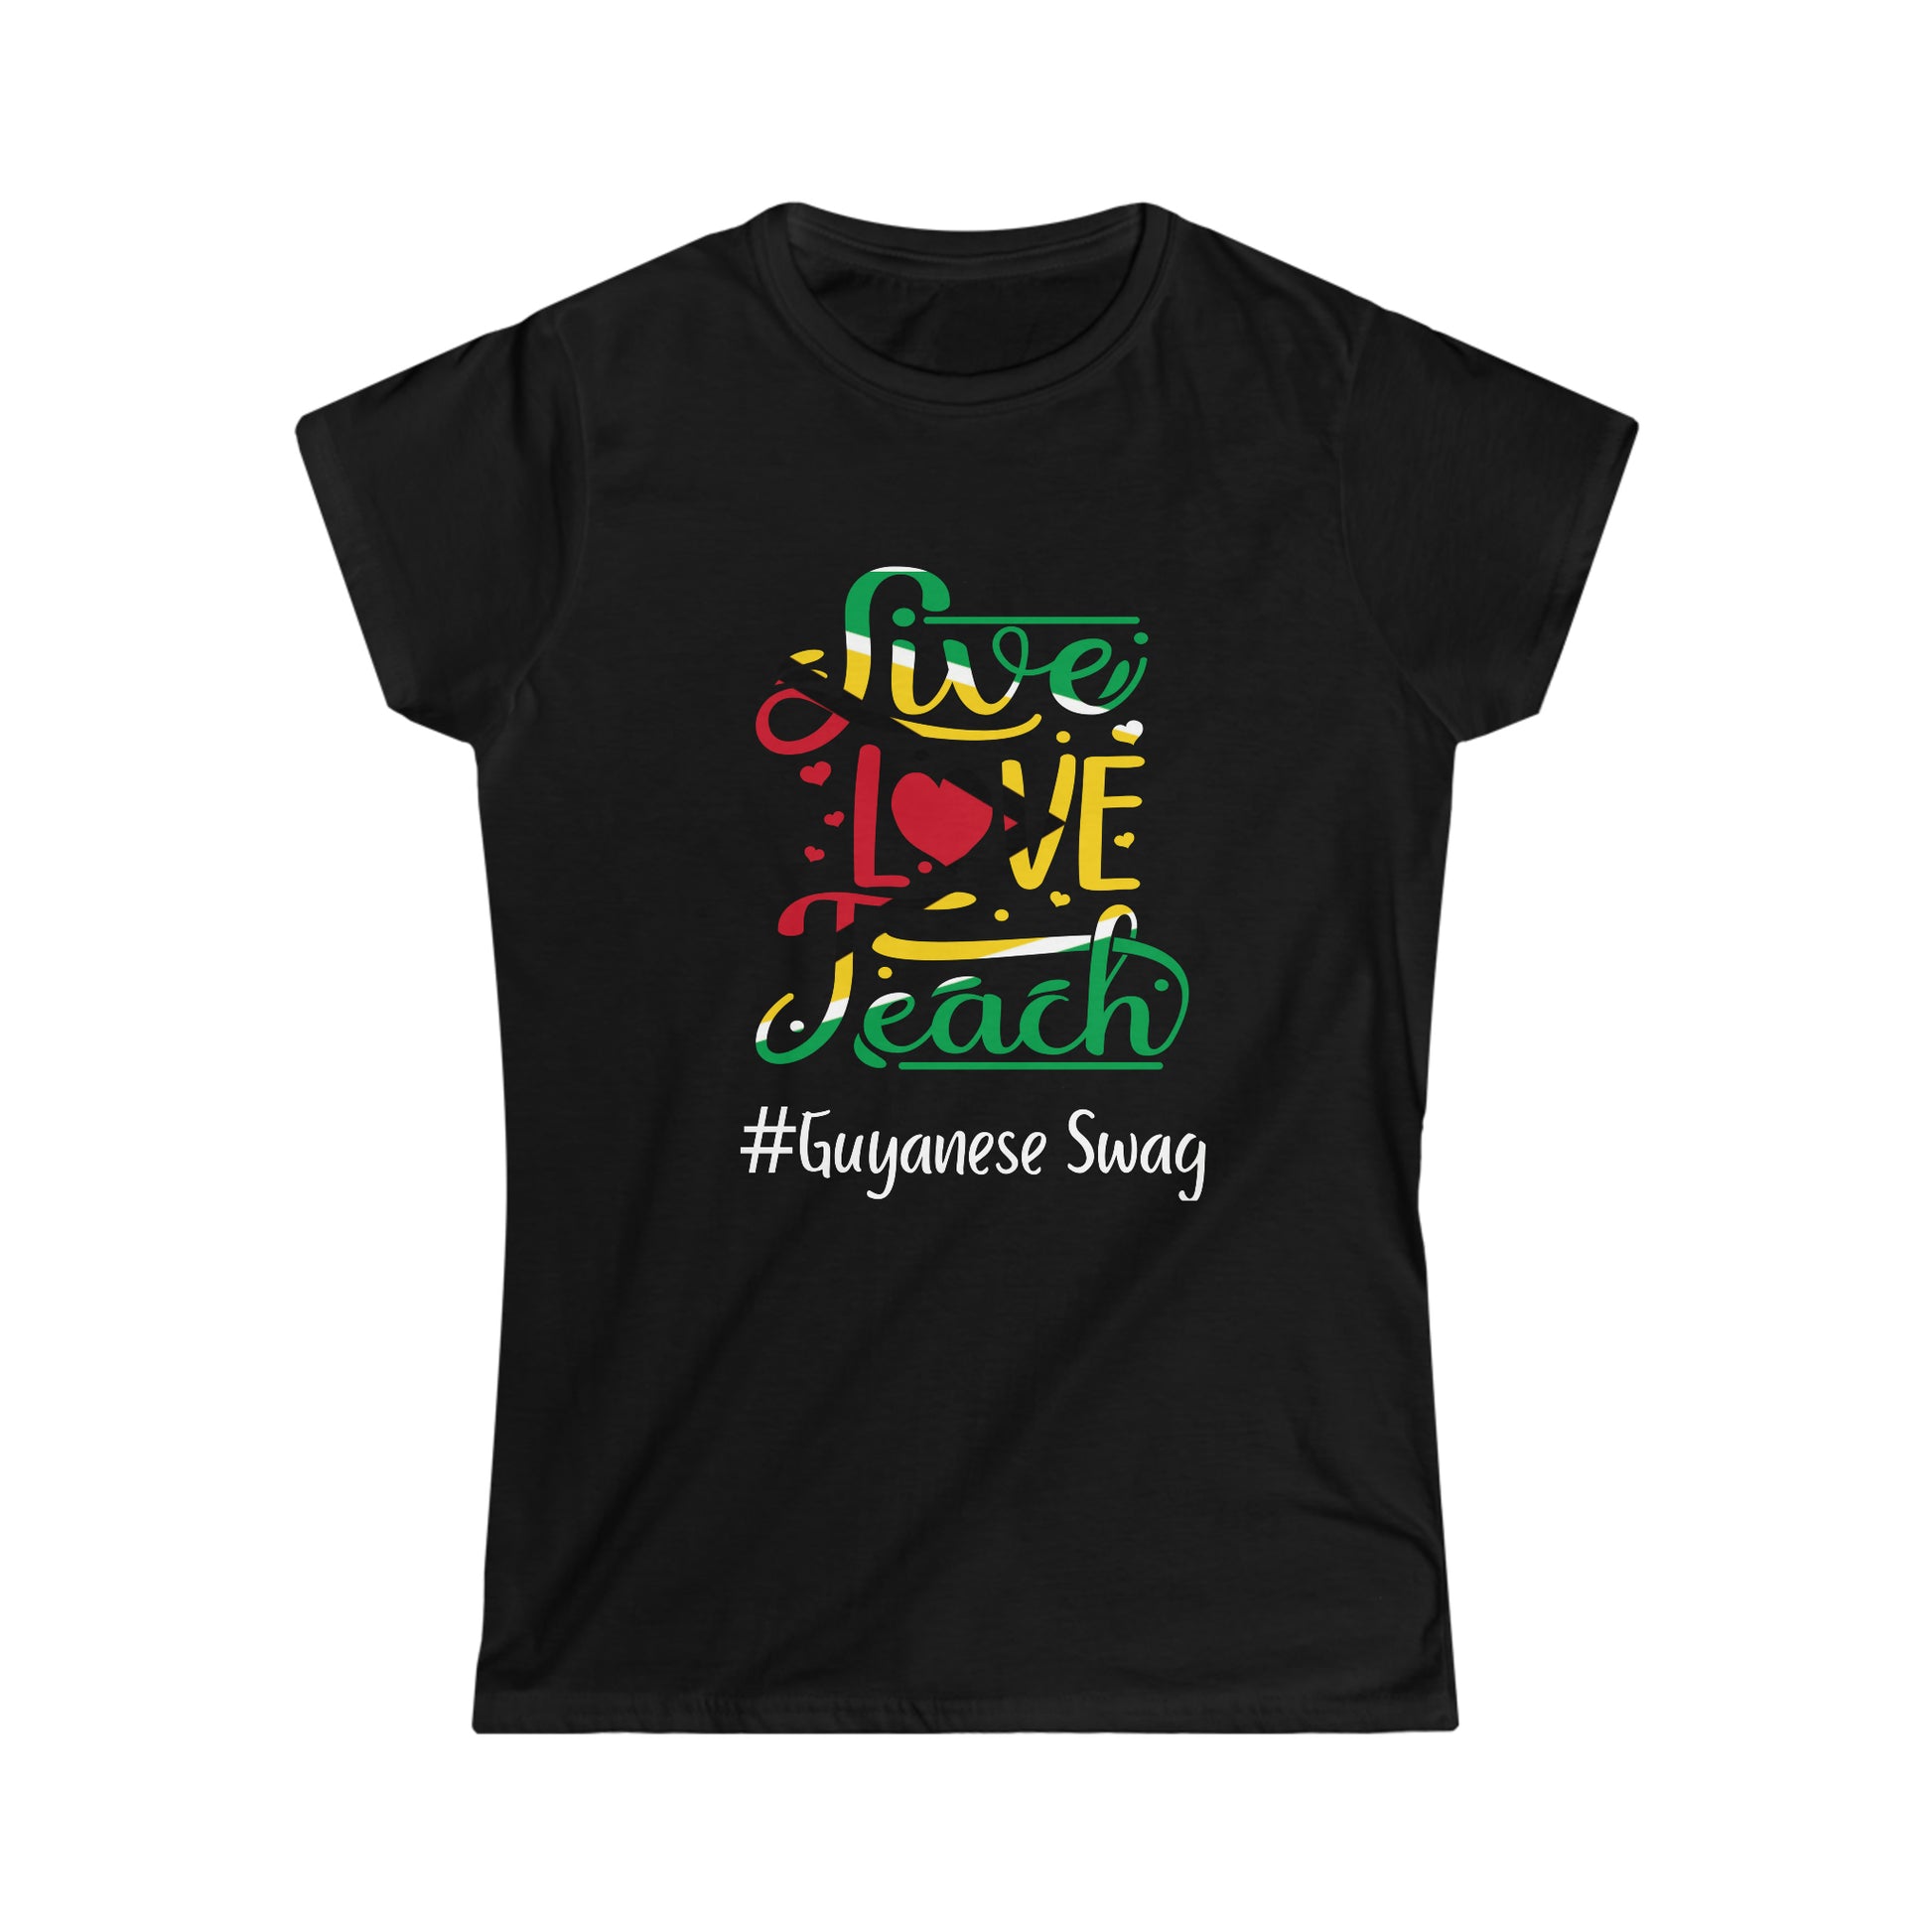 Live Love Teach Woman's Black Softstyle Tee by Guyanese Swag.